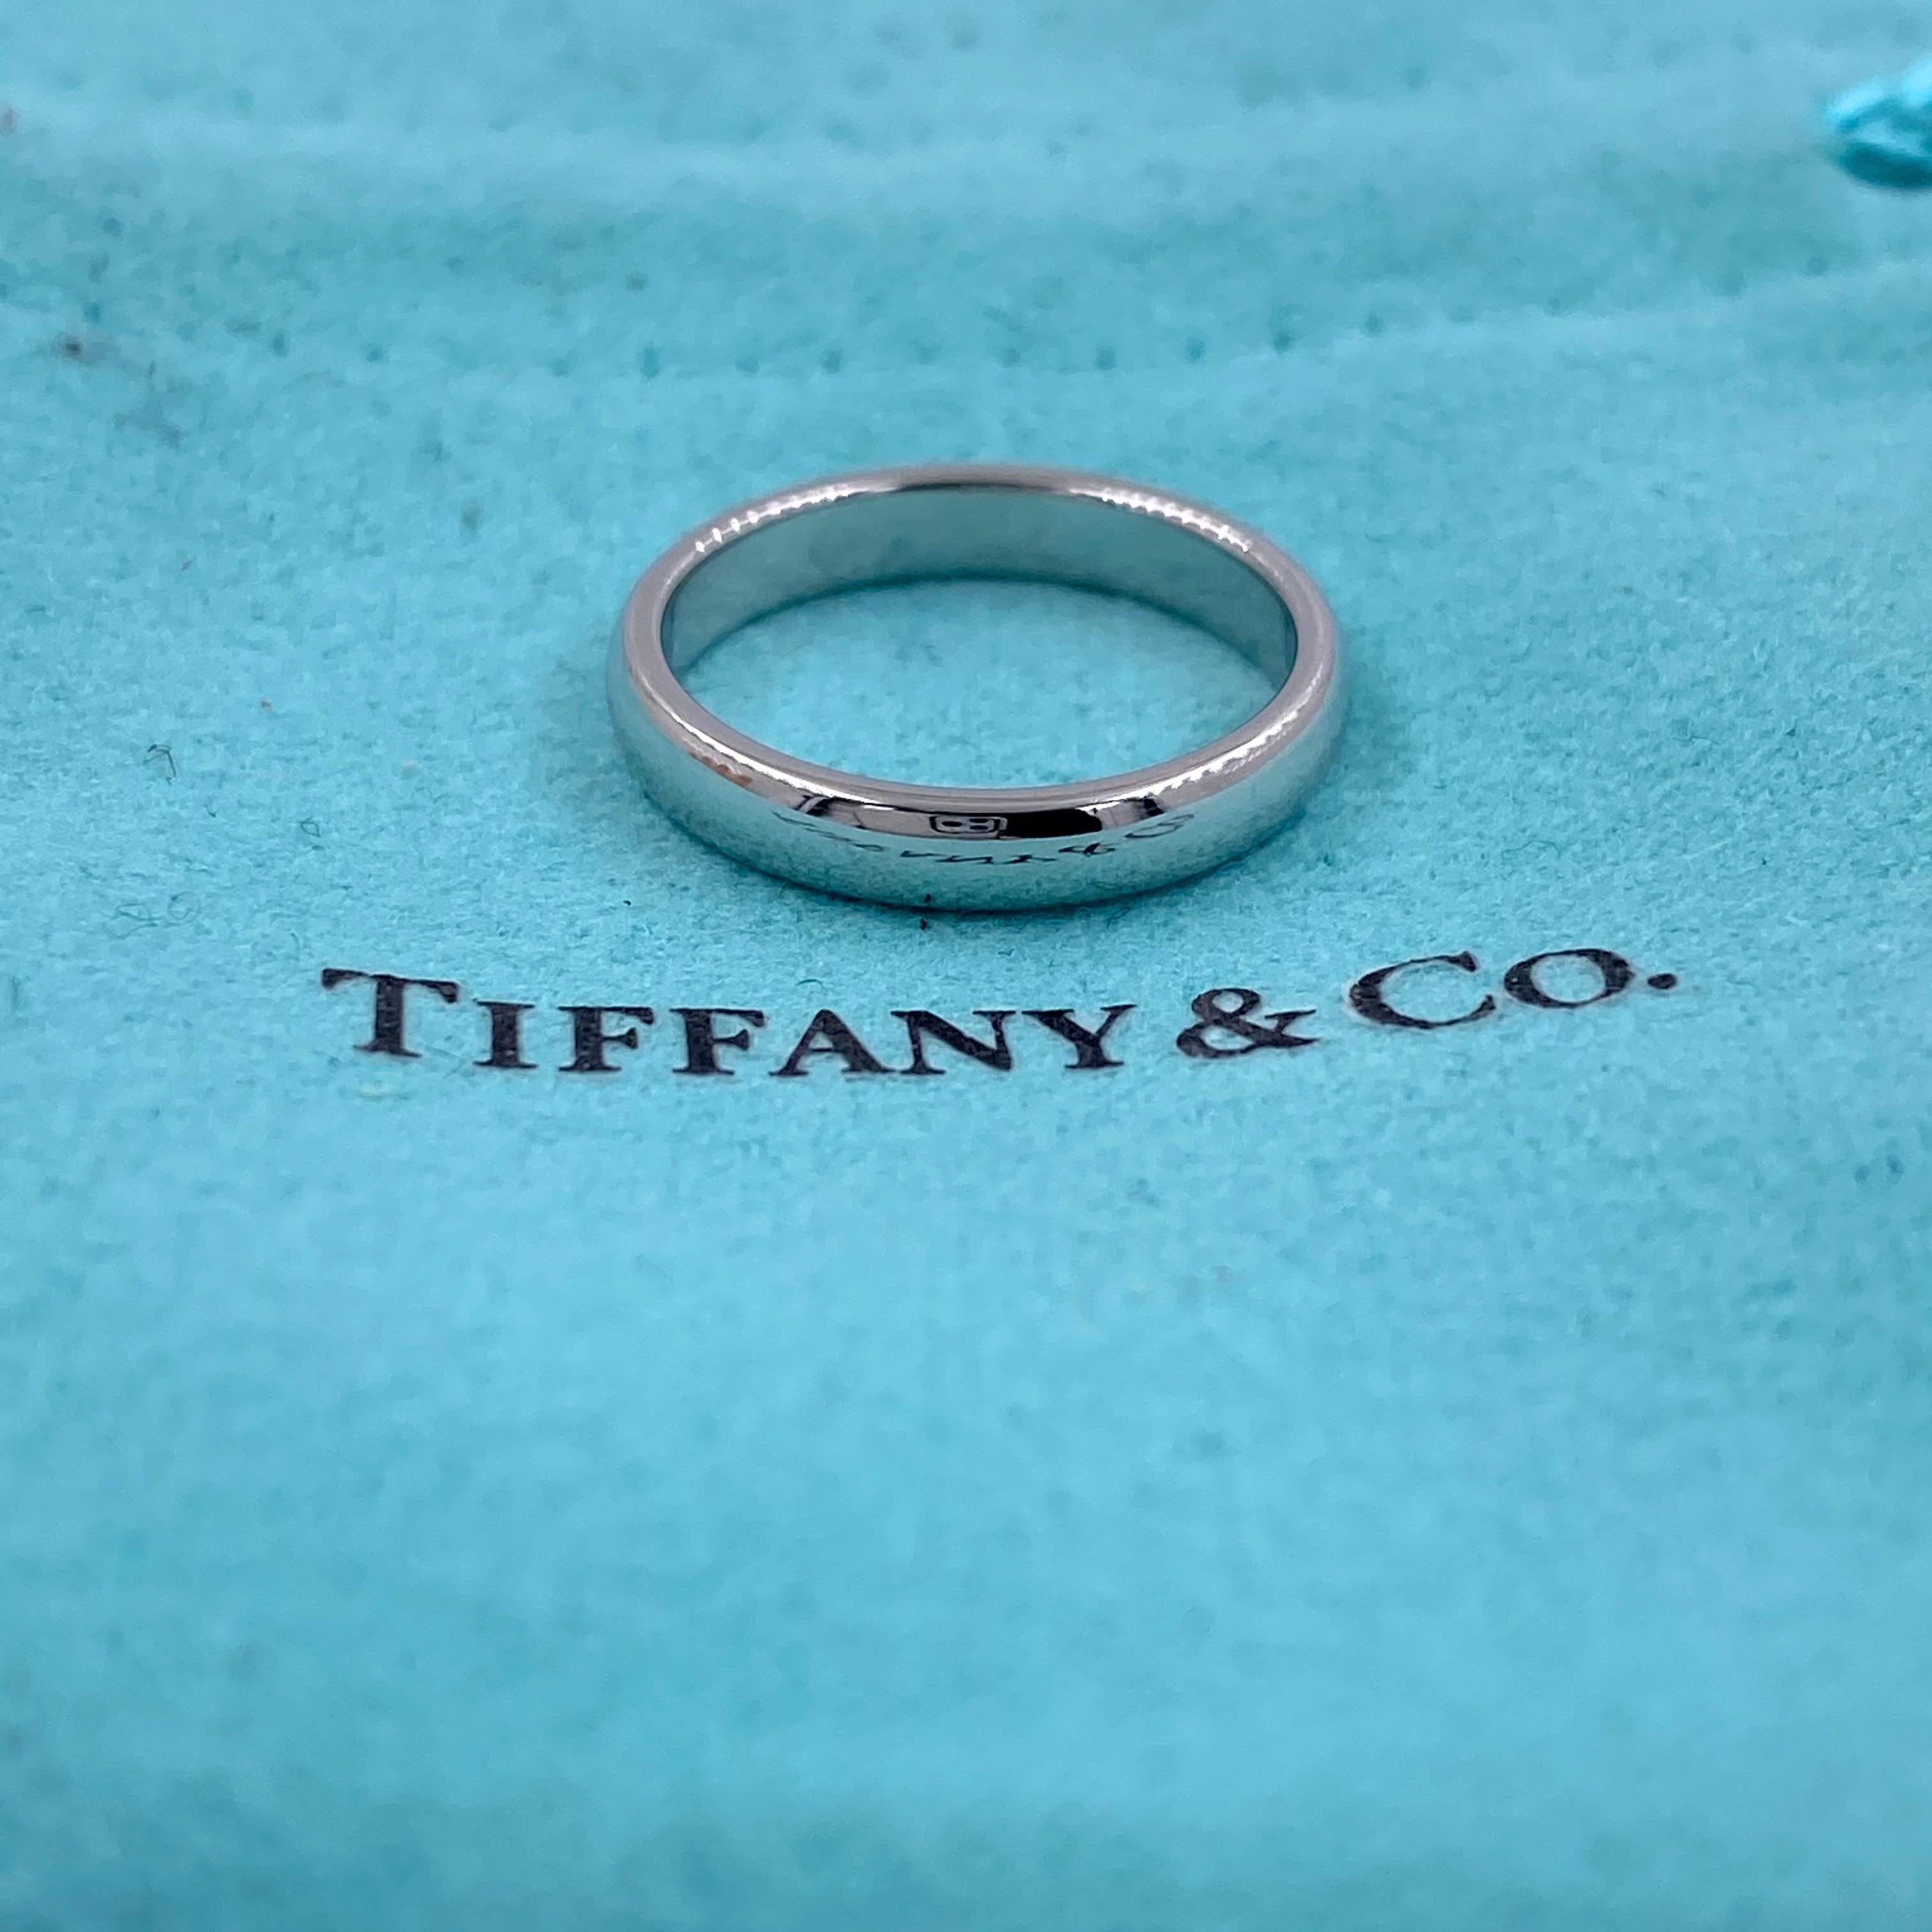 Tiffany & Co. Classic Wedding Band
Style:  3 MM
Metal:  Platinum PT950
Size:  4.50 sizable
Hallmark:  (C)TIFFANY&CO.PT950
Includes:  T&C Jewelry Pouch
Retail:  $1,150

Sku#11026TBB120220-4.5